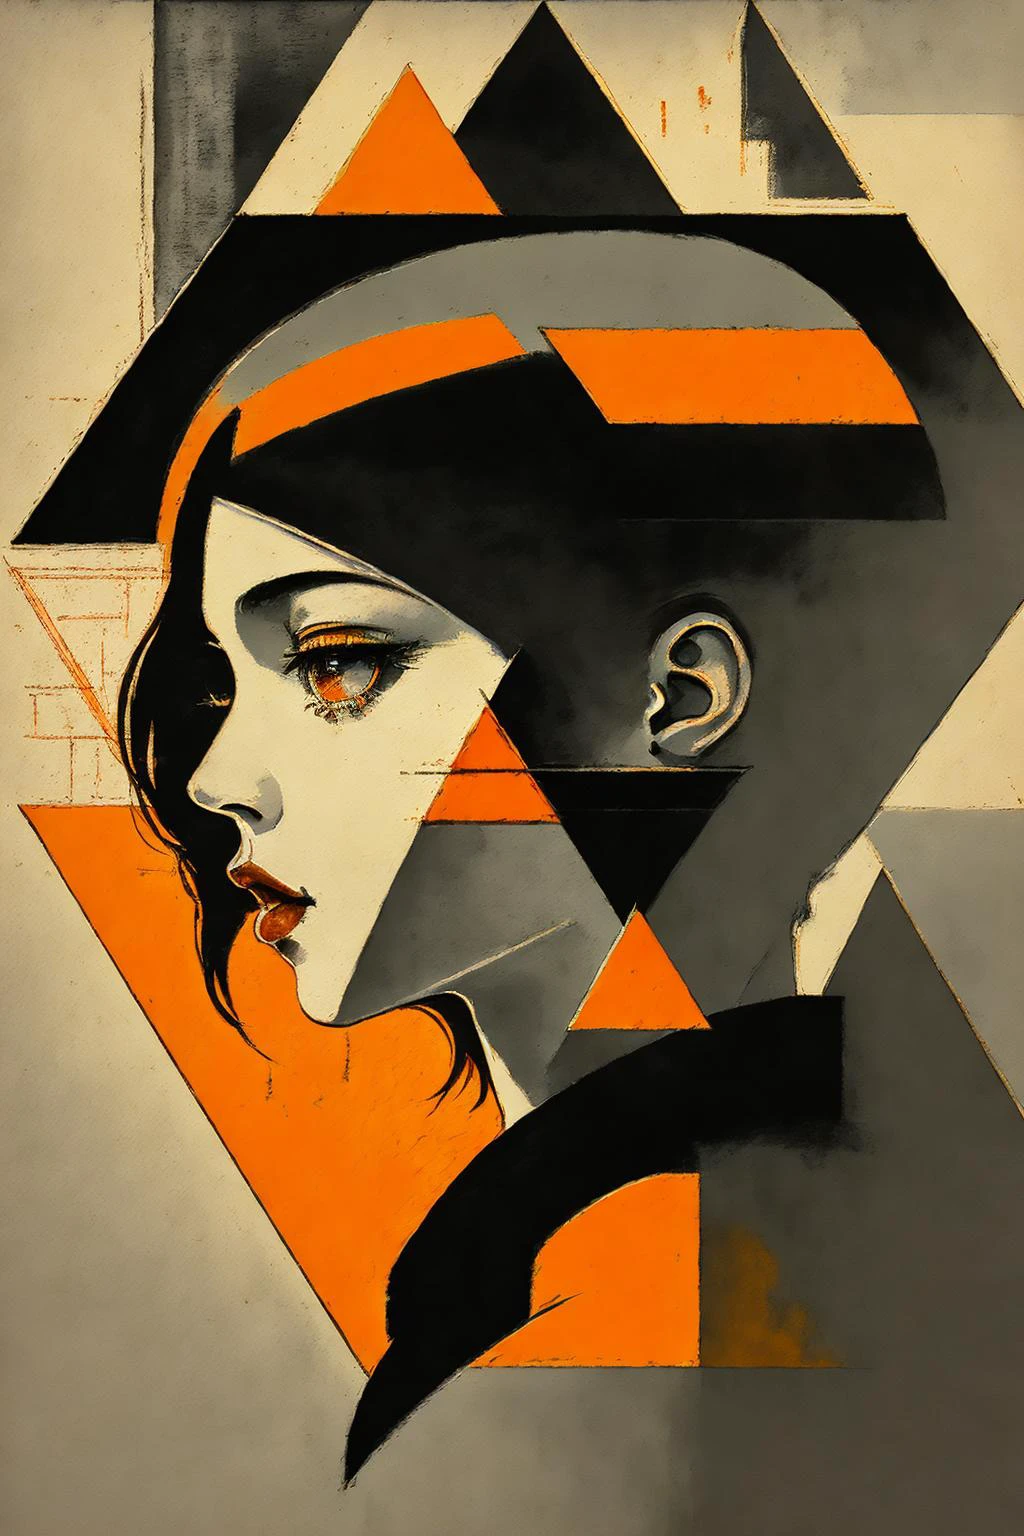 (masterpiece, 4k ,ultra detailed,raw photo:1.2),illustration,
(portrait:1.2),(from side:1.2),(looking right:1.2),
(simple background,black and orange background1.4),
(art deco:1.4),
(minimalism:1.4),
(clean:1.4),
(flat_color:1.4),
(geometric pattern:1.4),
(triangle:1.5),
CCDDA Artstyle